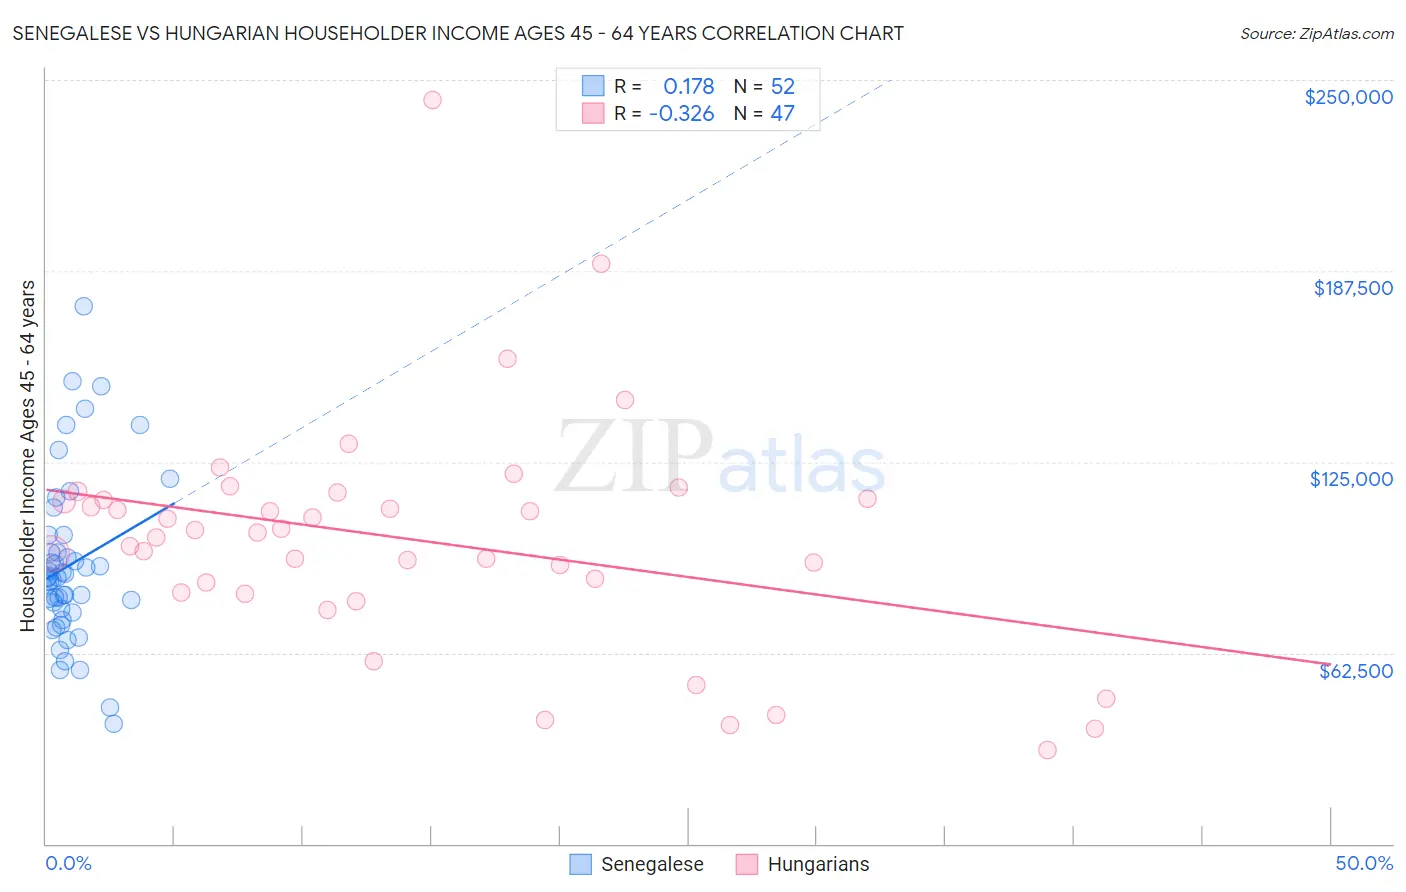 Senegalese vs Hungarian Householder Income Ages 45 - 64 years